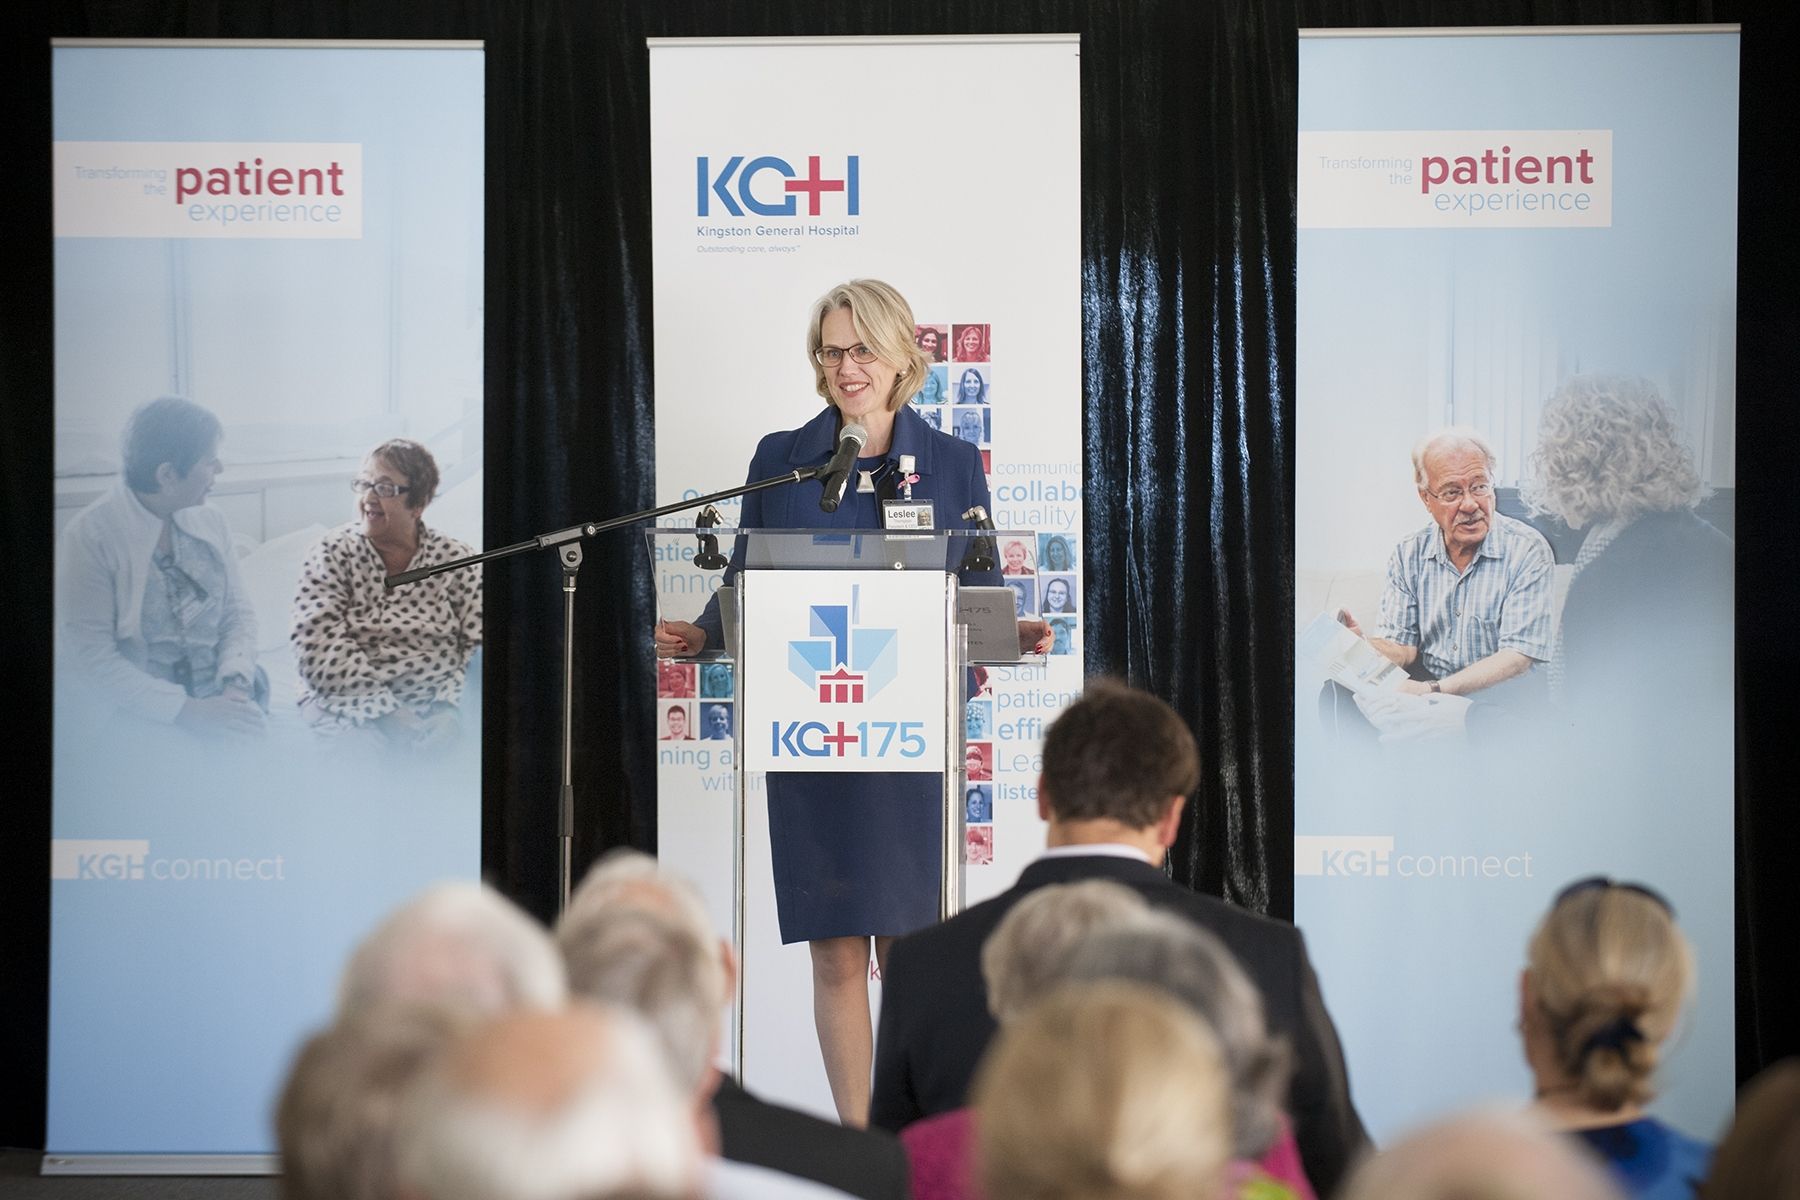 CEO Leslee Thompson has been with KGH since February 2009. She is pictured here welcoming staff and the community at our hospital's 175th Anniversary celebration back in September 2013. 